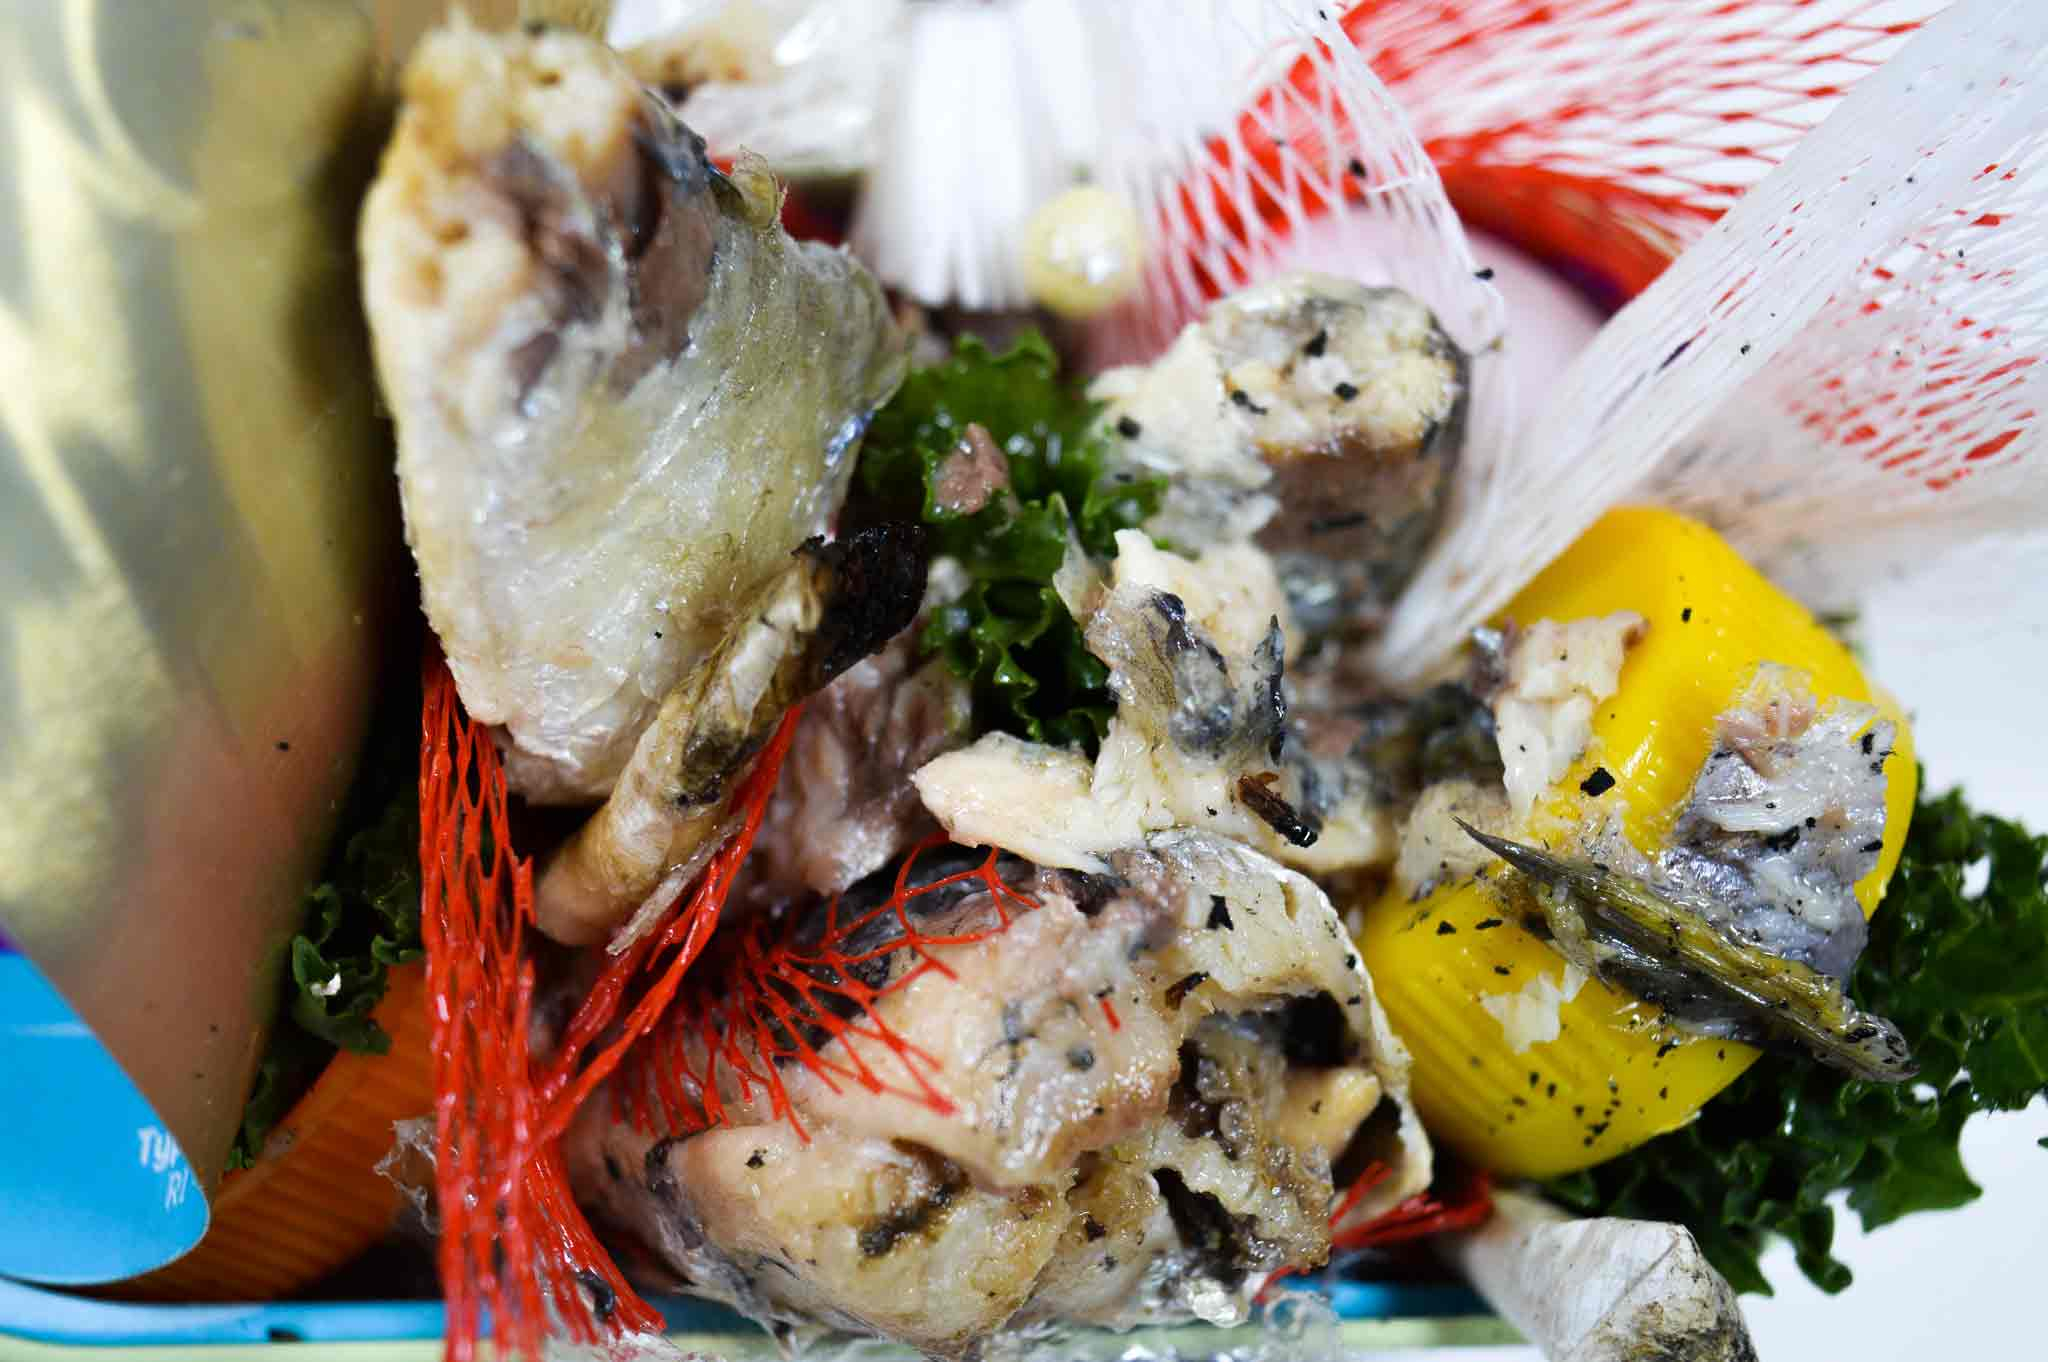 Close up shot of sardines mixed with plastic.